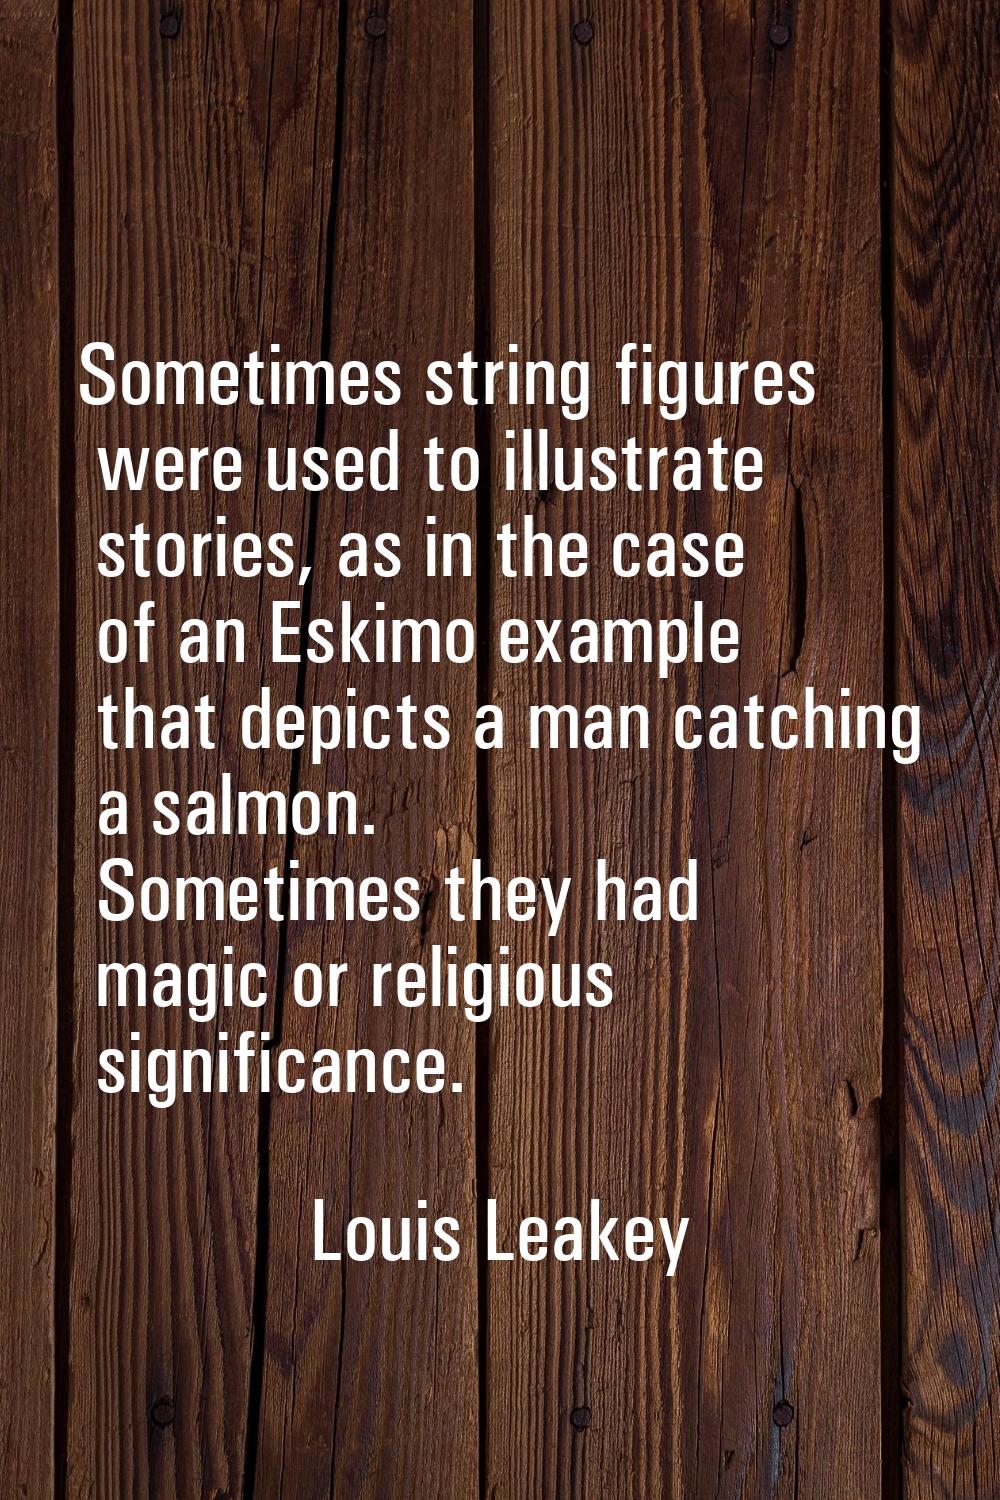 Sometimes string figures were used to illustrate stories, as in the case of an Eskimo example that 